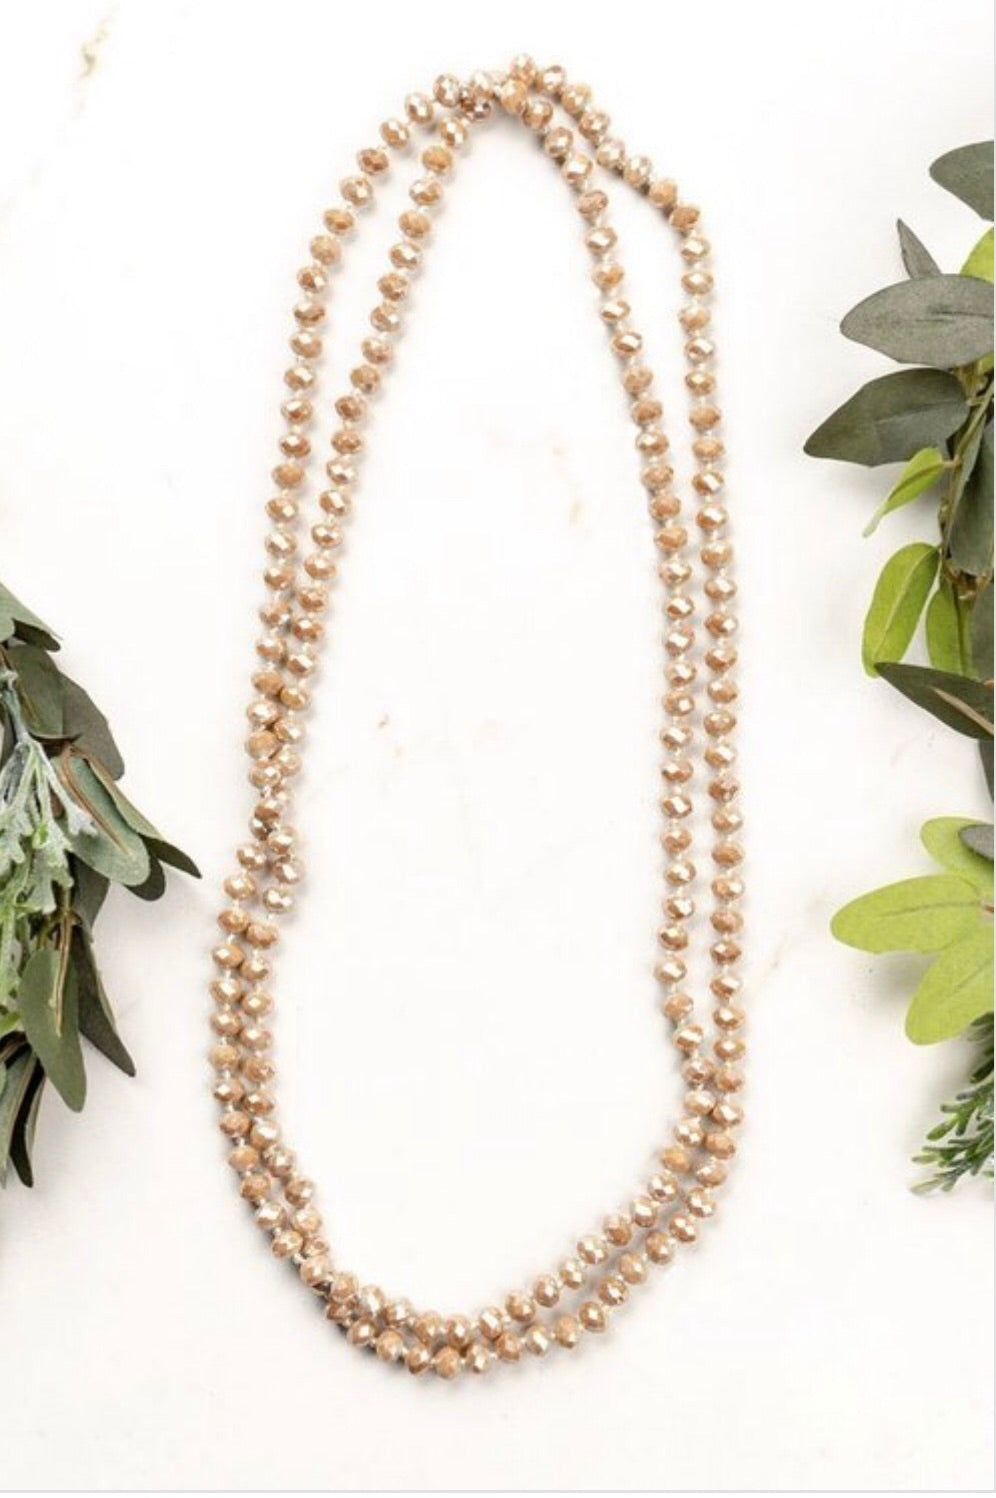 Mocha Beaded Necklace - Corinne an Affordable Women's Clothing Boutique in the US USA